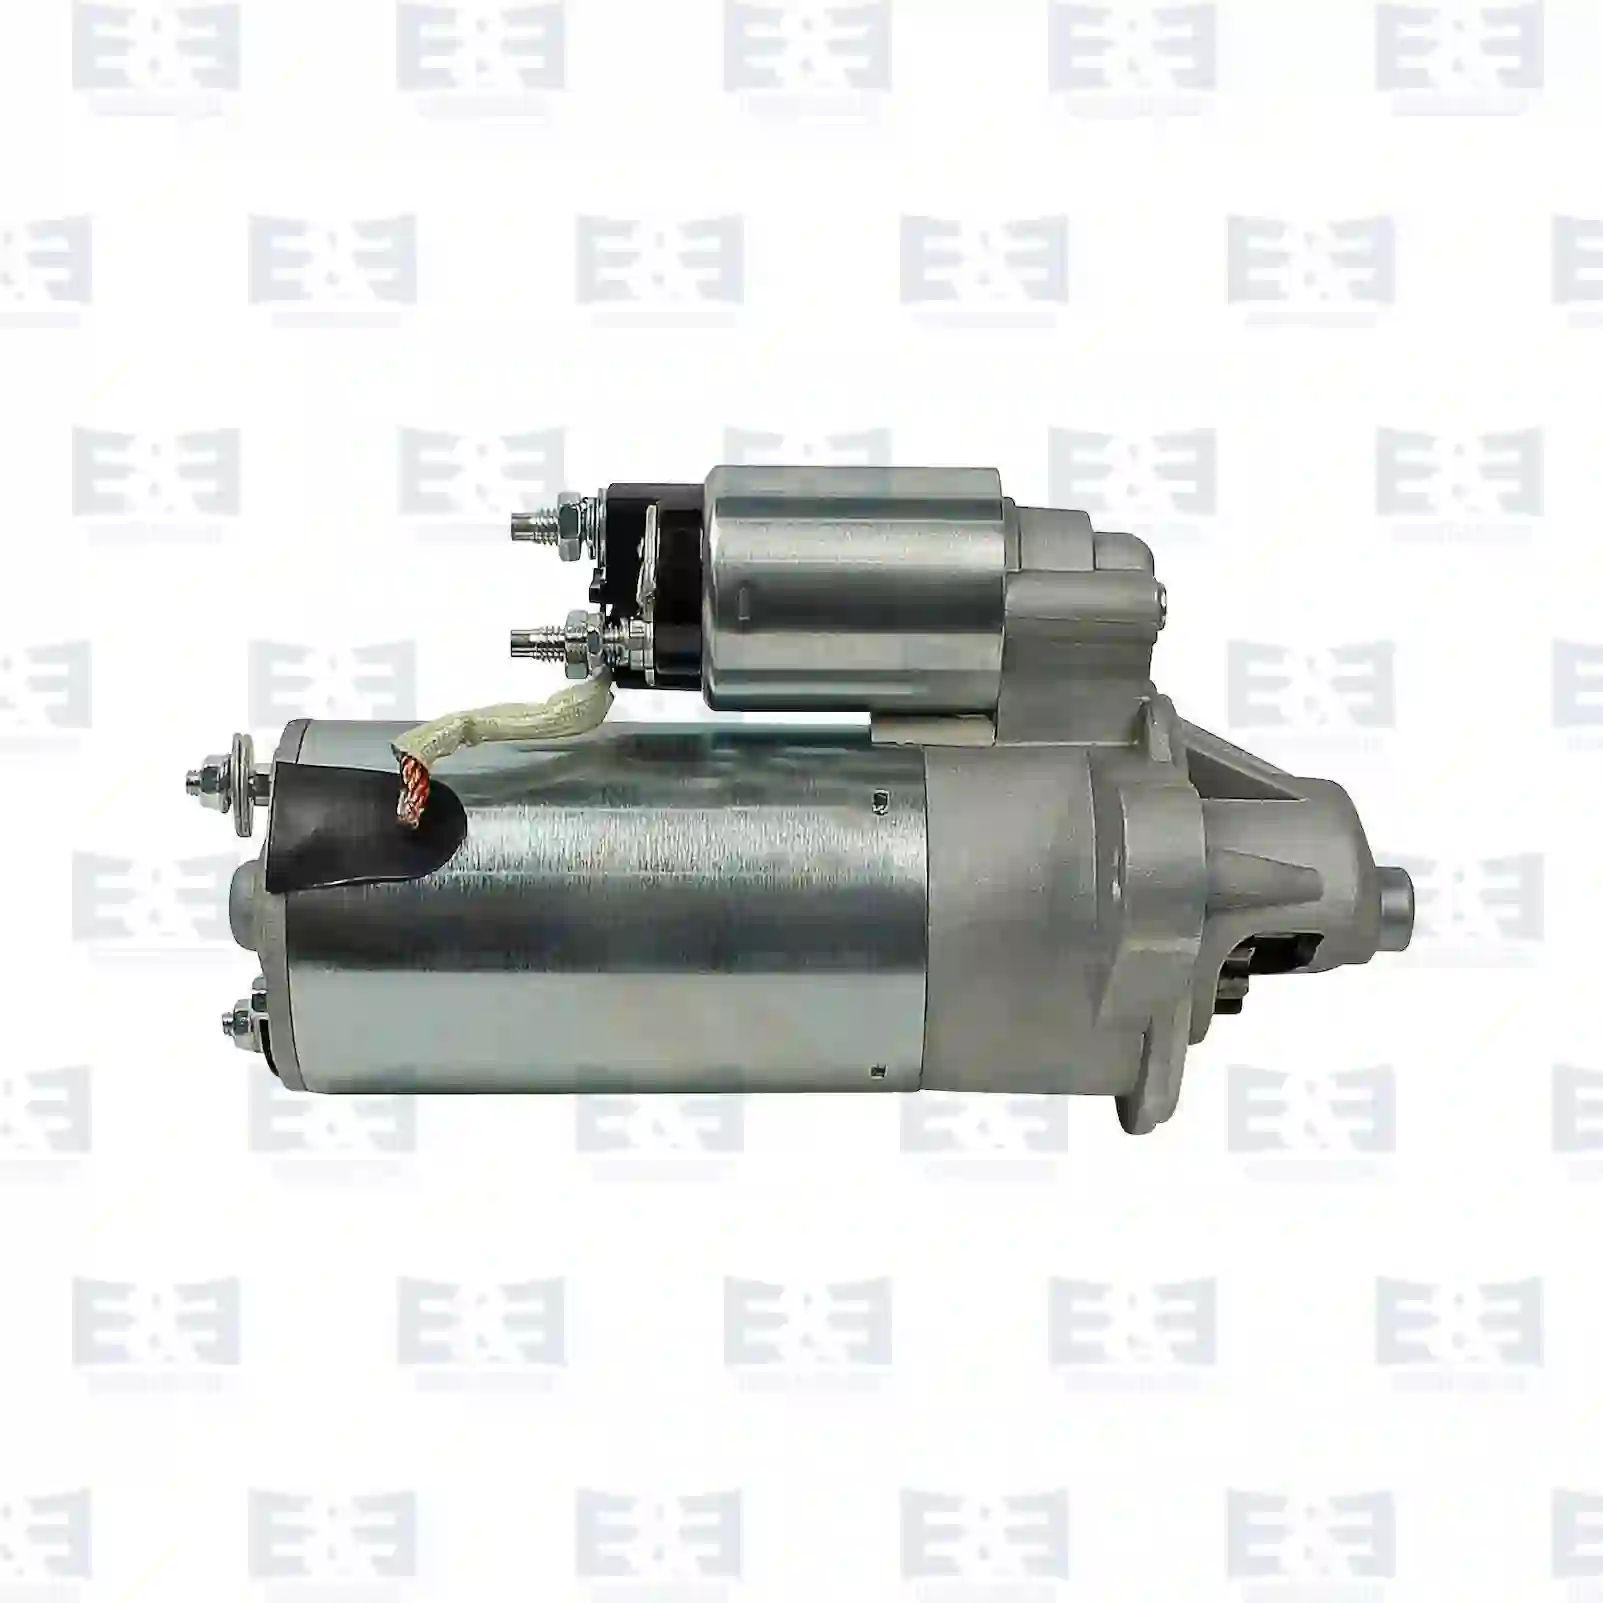 Starter Motor Starter, EE No 2E2290880 ,  oem no:1516738, 1008823, 1416198, 1507703, 1564723, 1653206, 5003643, 6160440, 715F1-1000-JA, 715F1-1000-MA, 755F1-1000-AA, 755F1-1000-AB, 755F1-1000-BB, 795F1-1000-CA, 835F-11000-AB, 835F1-1000-AA, 835F1-1000-AC, 835F1-1000-BB, 835FX-11000-B, 835FX-11000-BB, 835X-11000-AC, R835X-11000-AC1, SS655, SS672 E&E Truck Spare Parts | Truck Spare Parts, Auotomotive Spare Parts